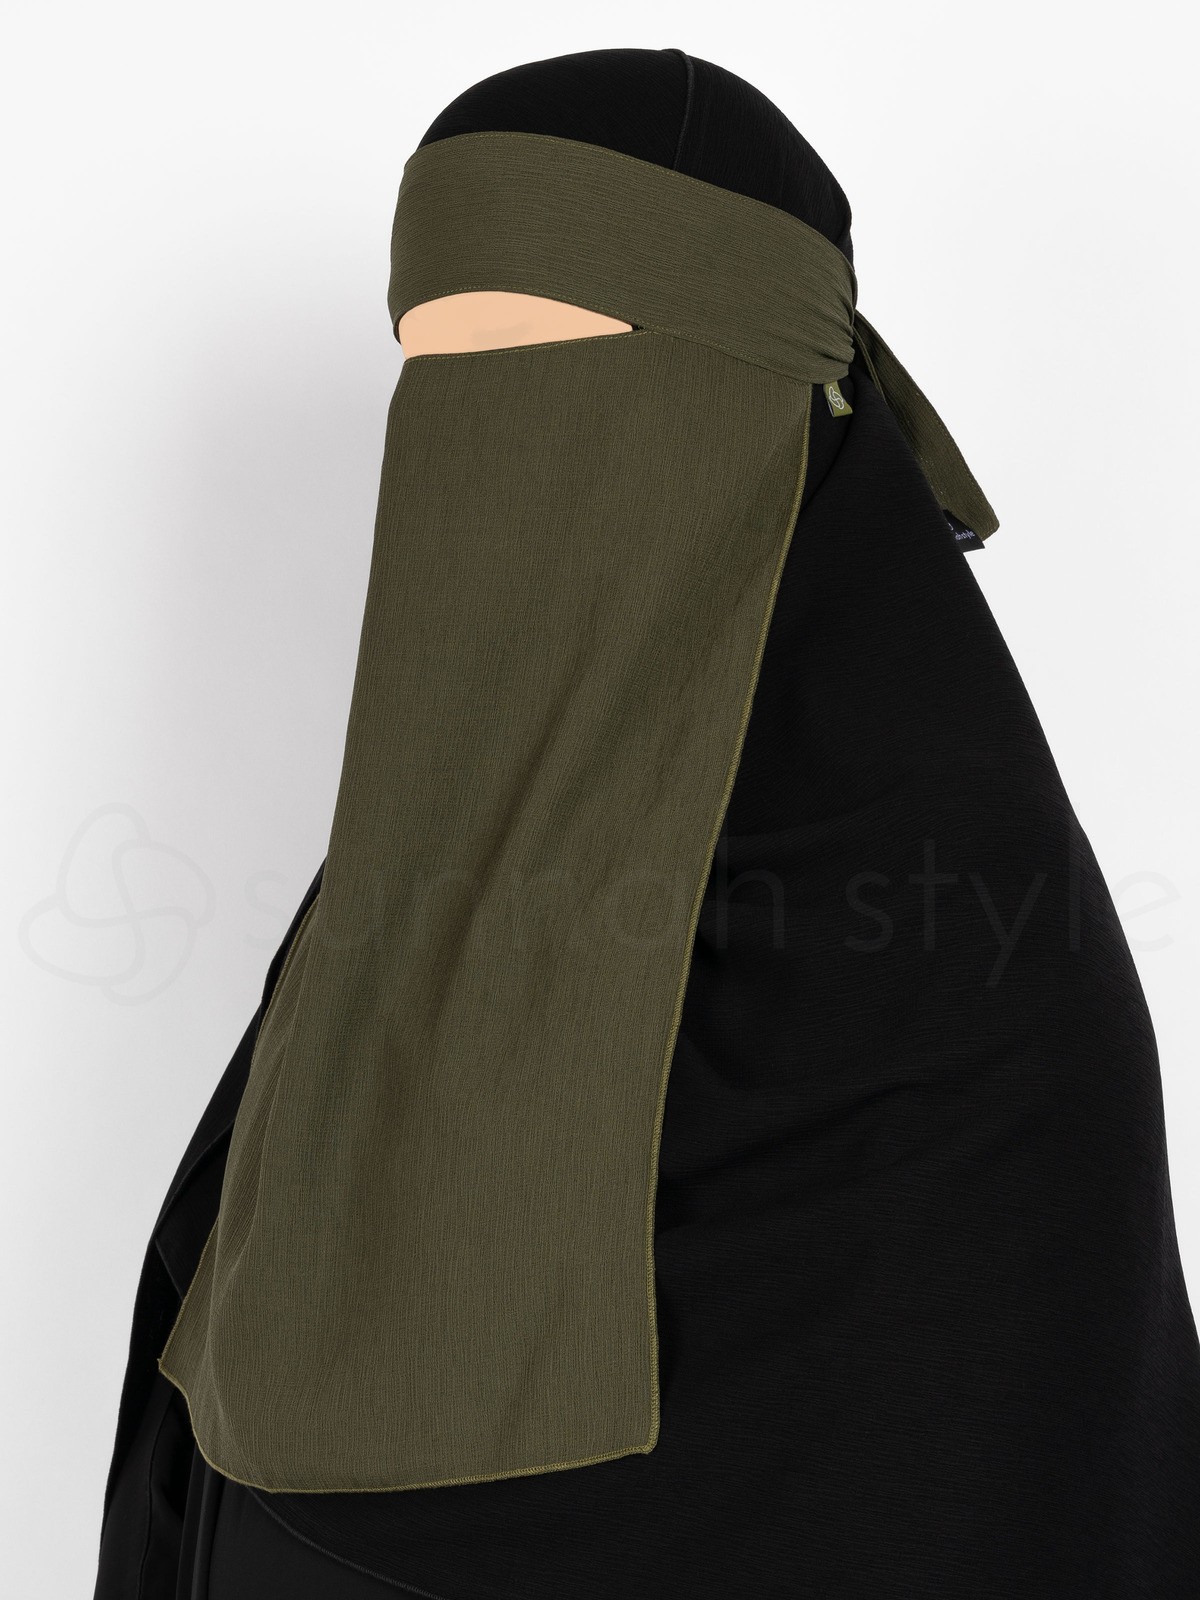 Sunnah Style - Brushed One Layer Niqab (Army)